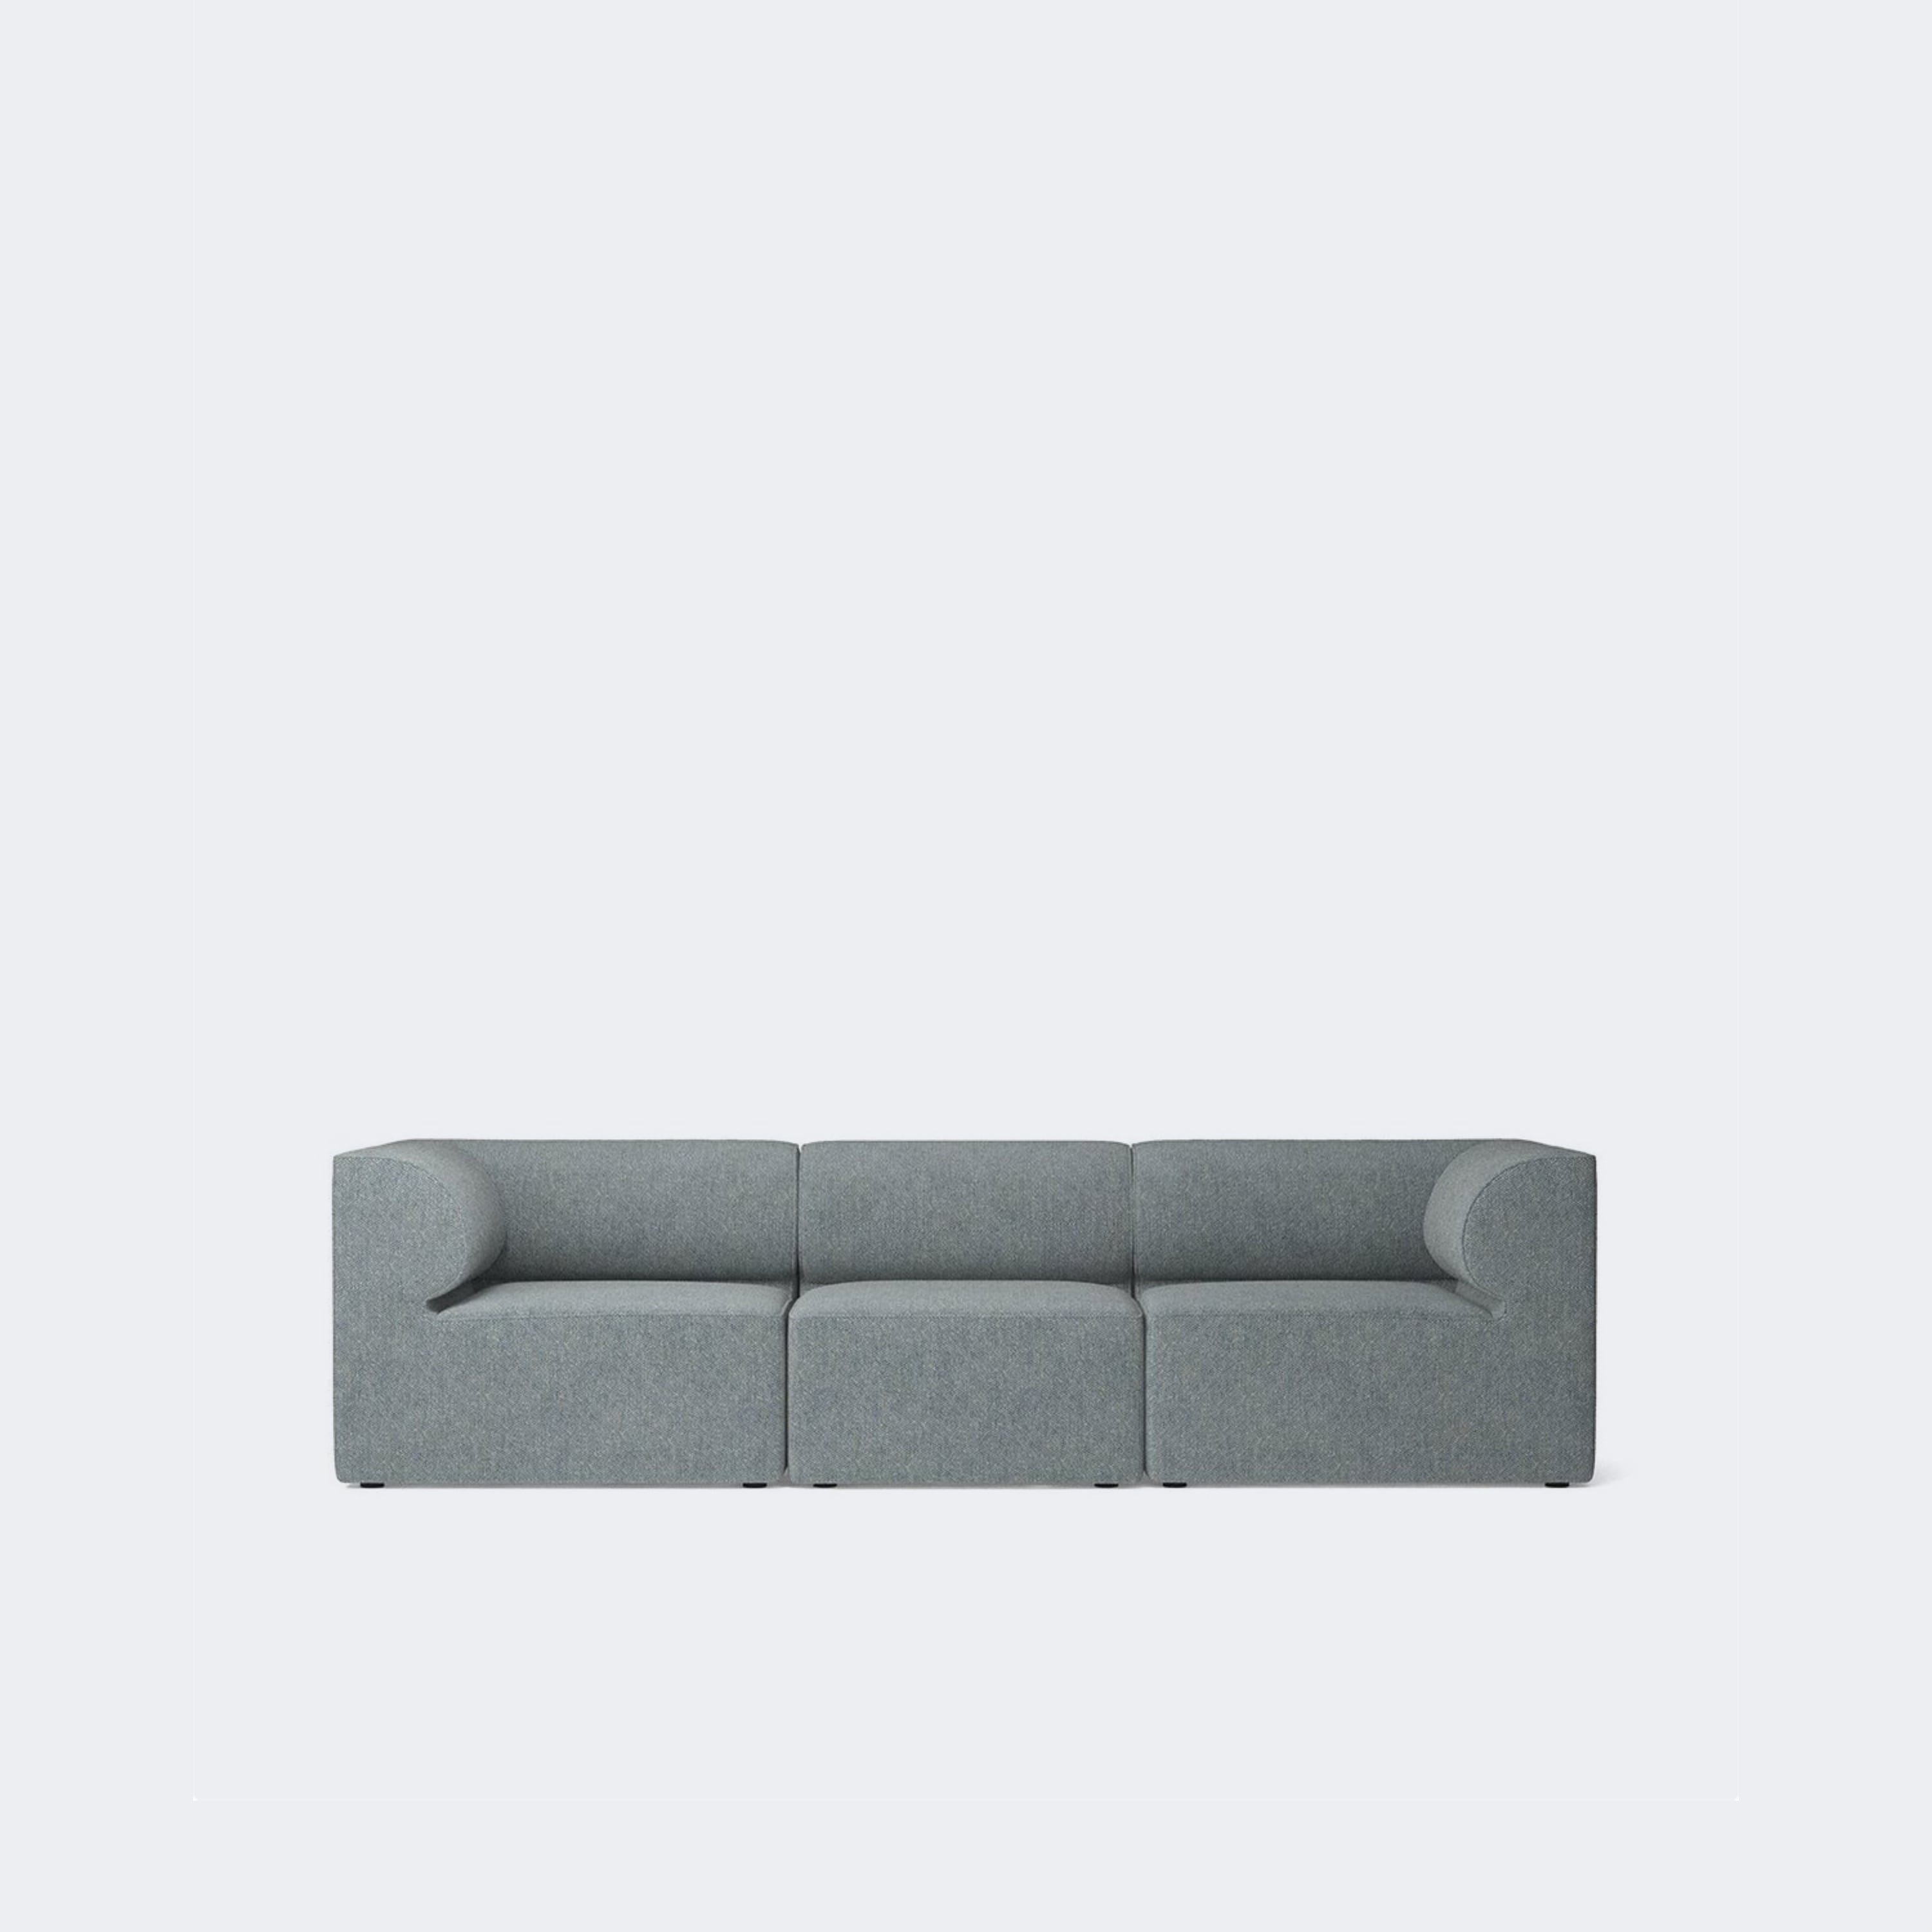 Audo Copenhagen Eave Sectional Sofa, 3-Seater Made To Order 012 SAFIRE - KANSO